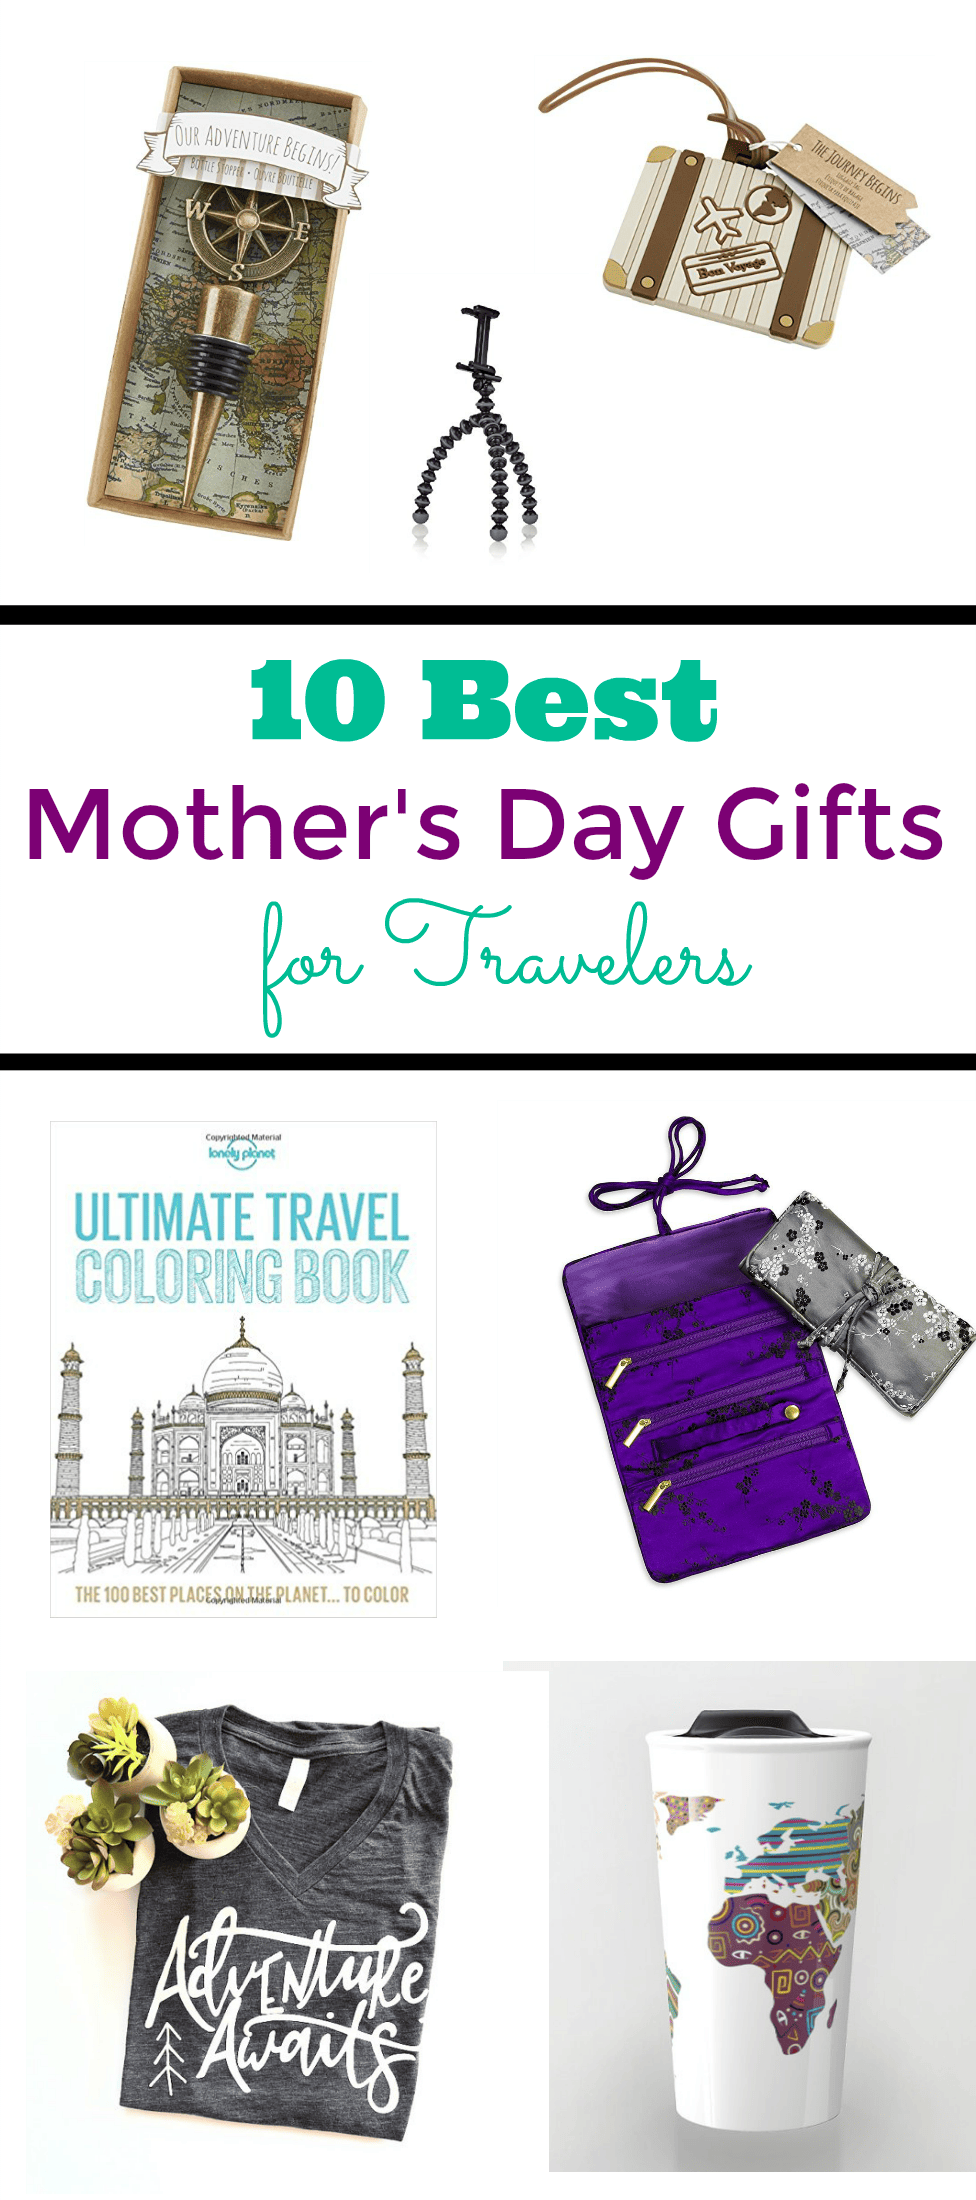 https://www.thetalkingsuitcase.com/wp-content/uploads/2017/05/wsi-imageoptim-Best-Mothers-Day-Gifts-for-Travelers-.png